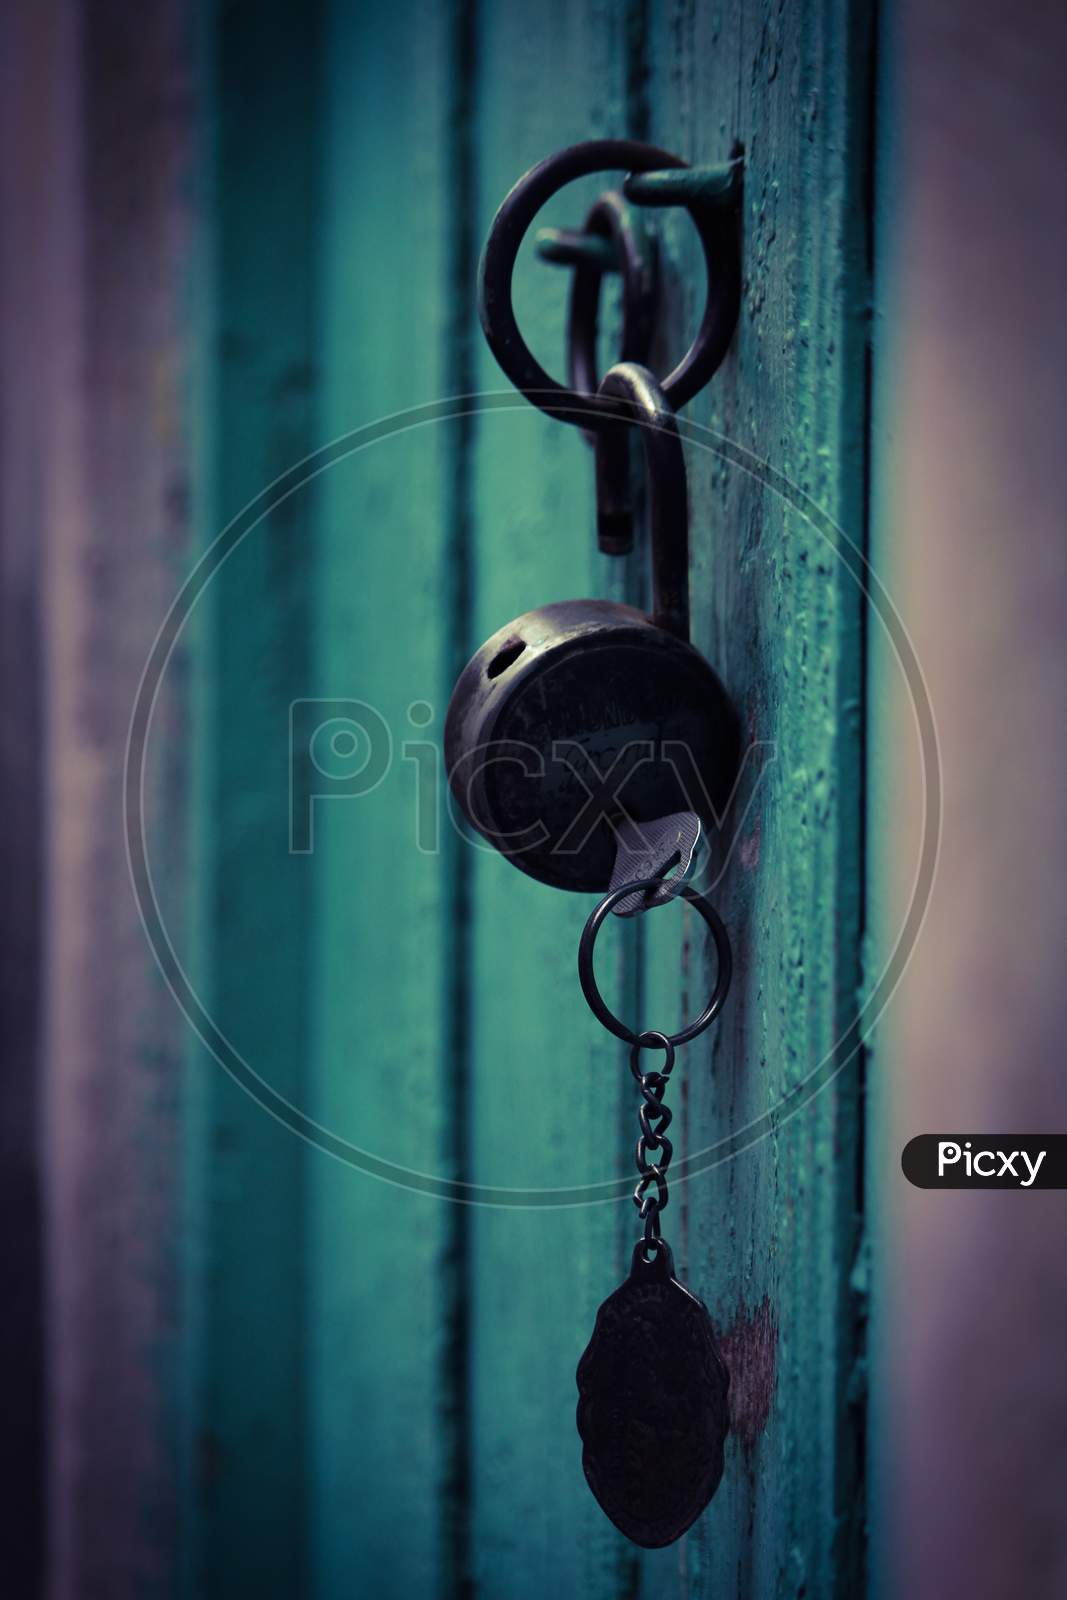 An Opened Lock And Key Hanging In The Wooden Door